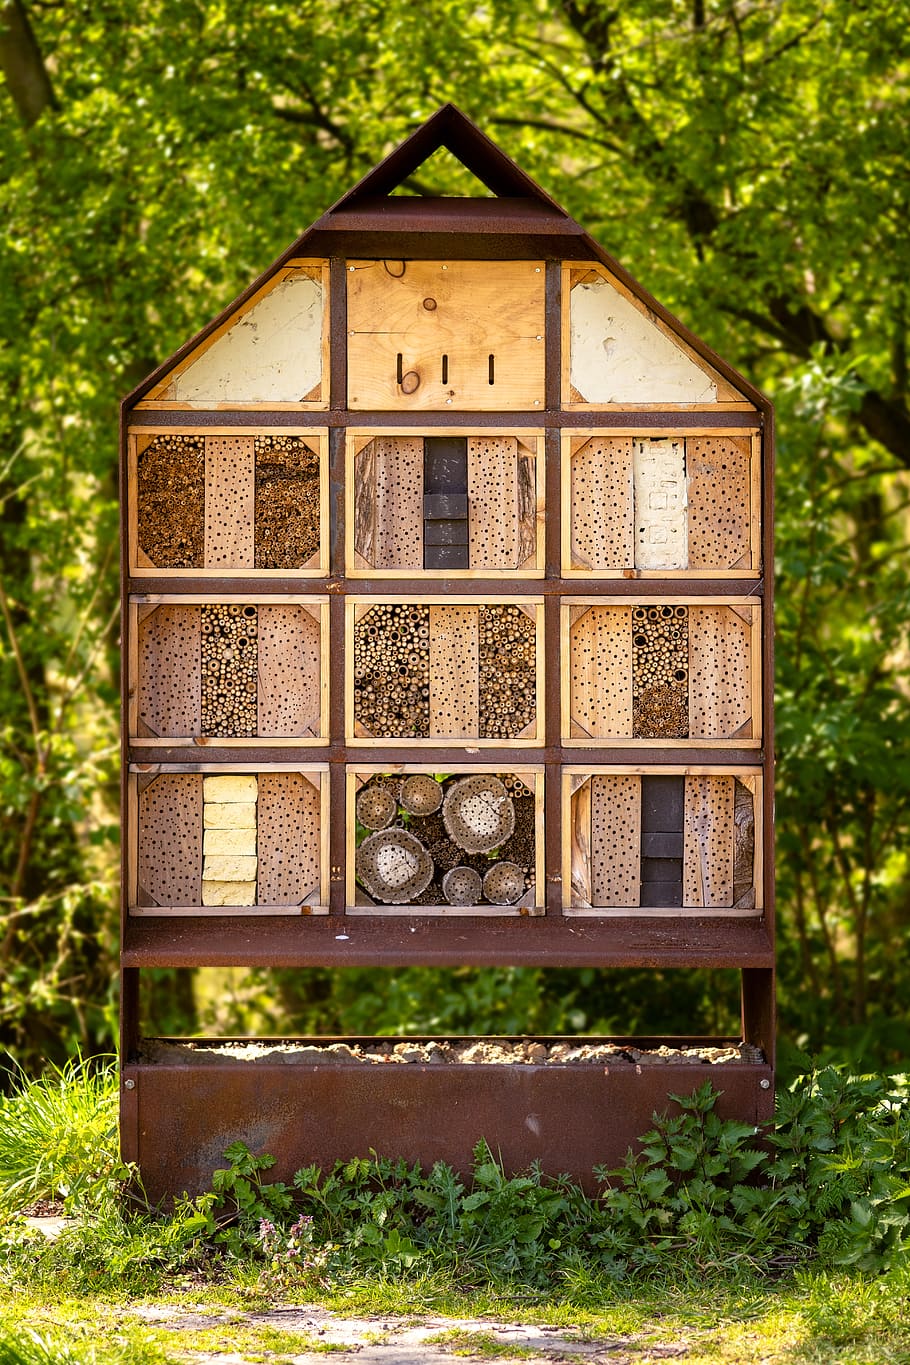 insects hotel, insects, hotel, spring, bees, ladybugs, park, forest, nature, tree